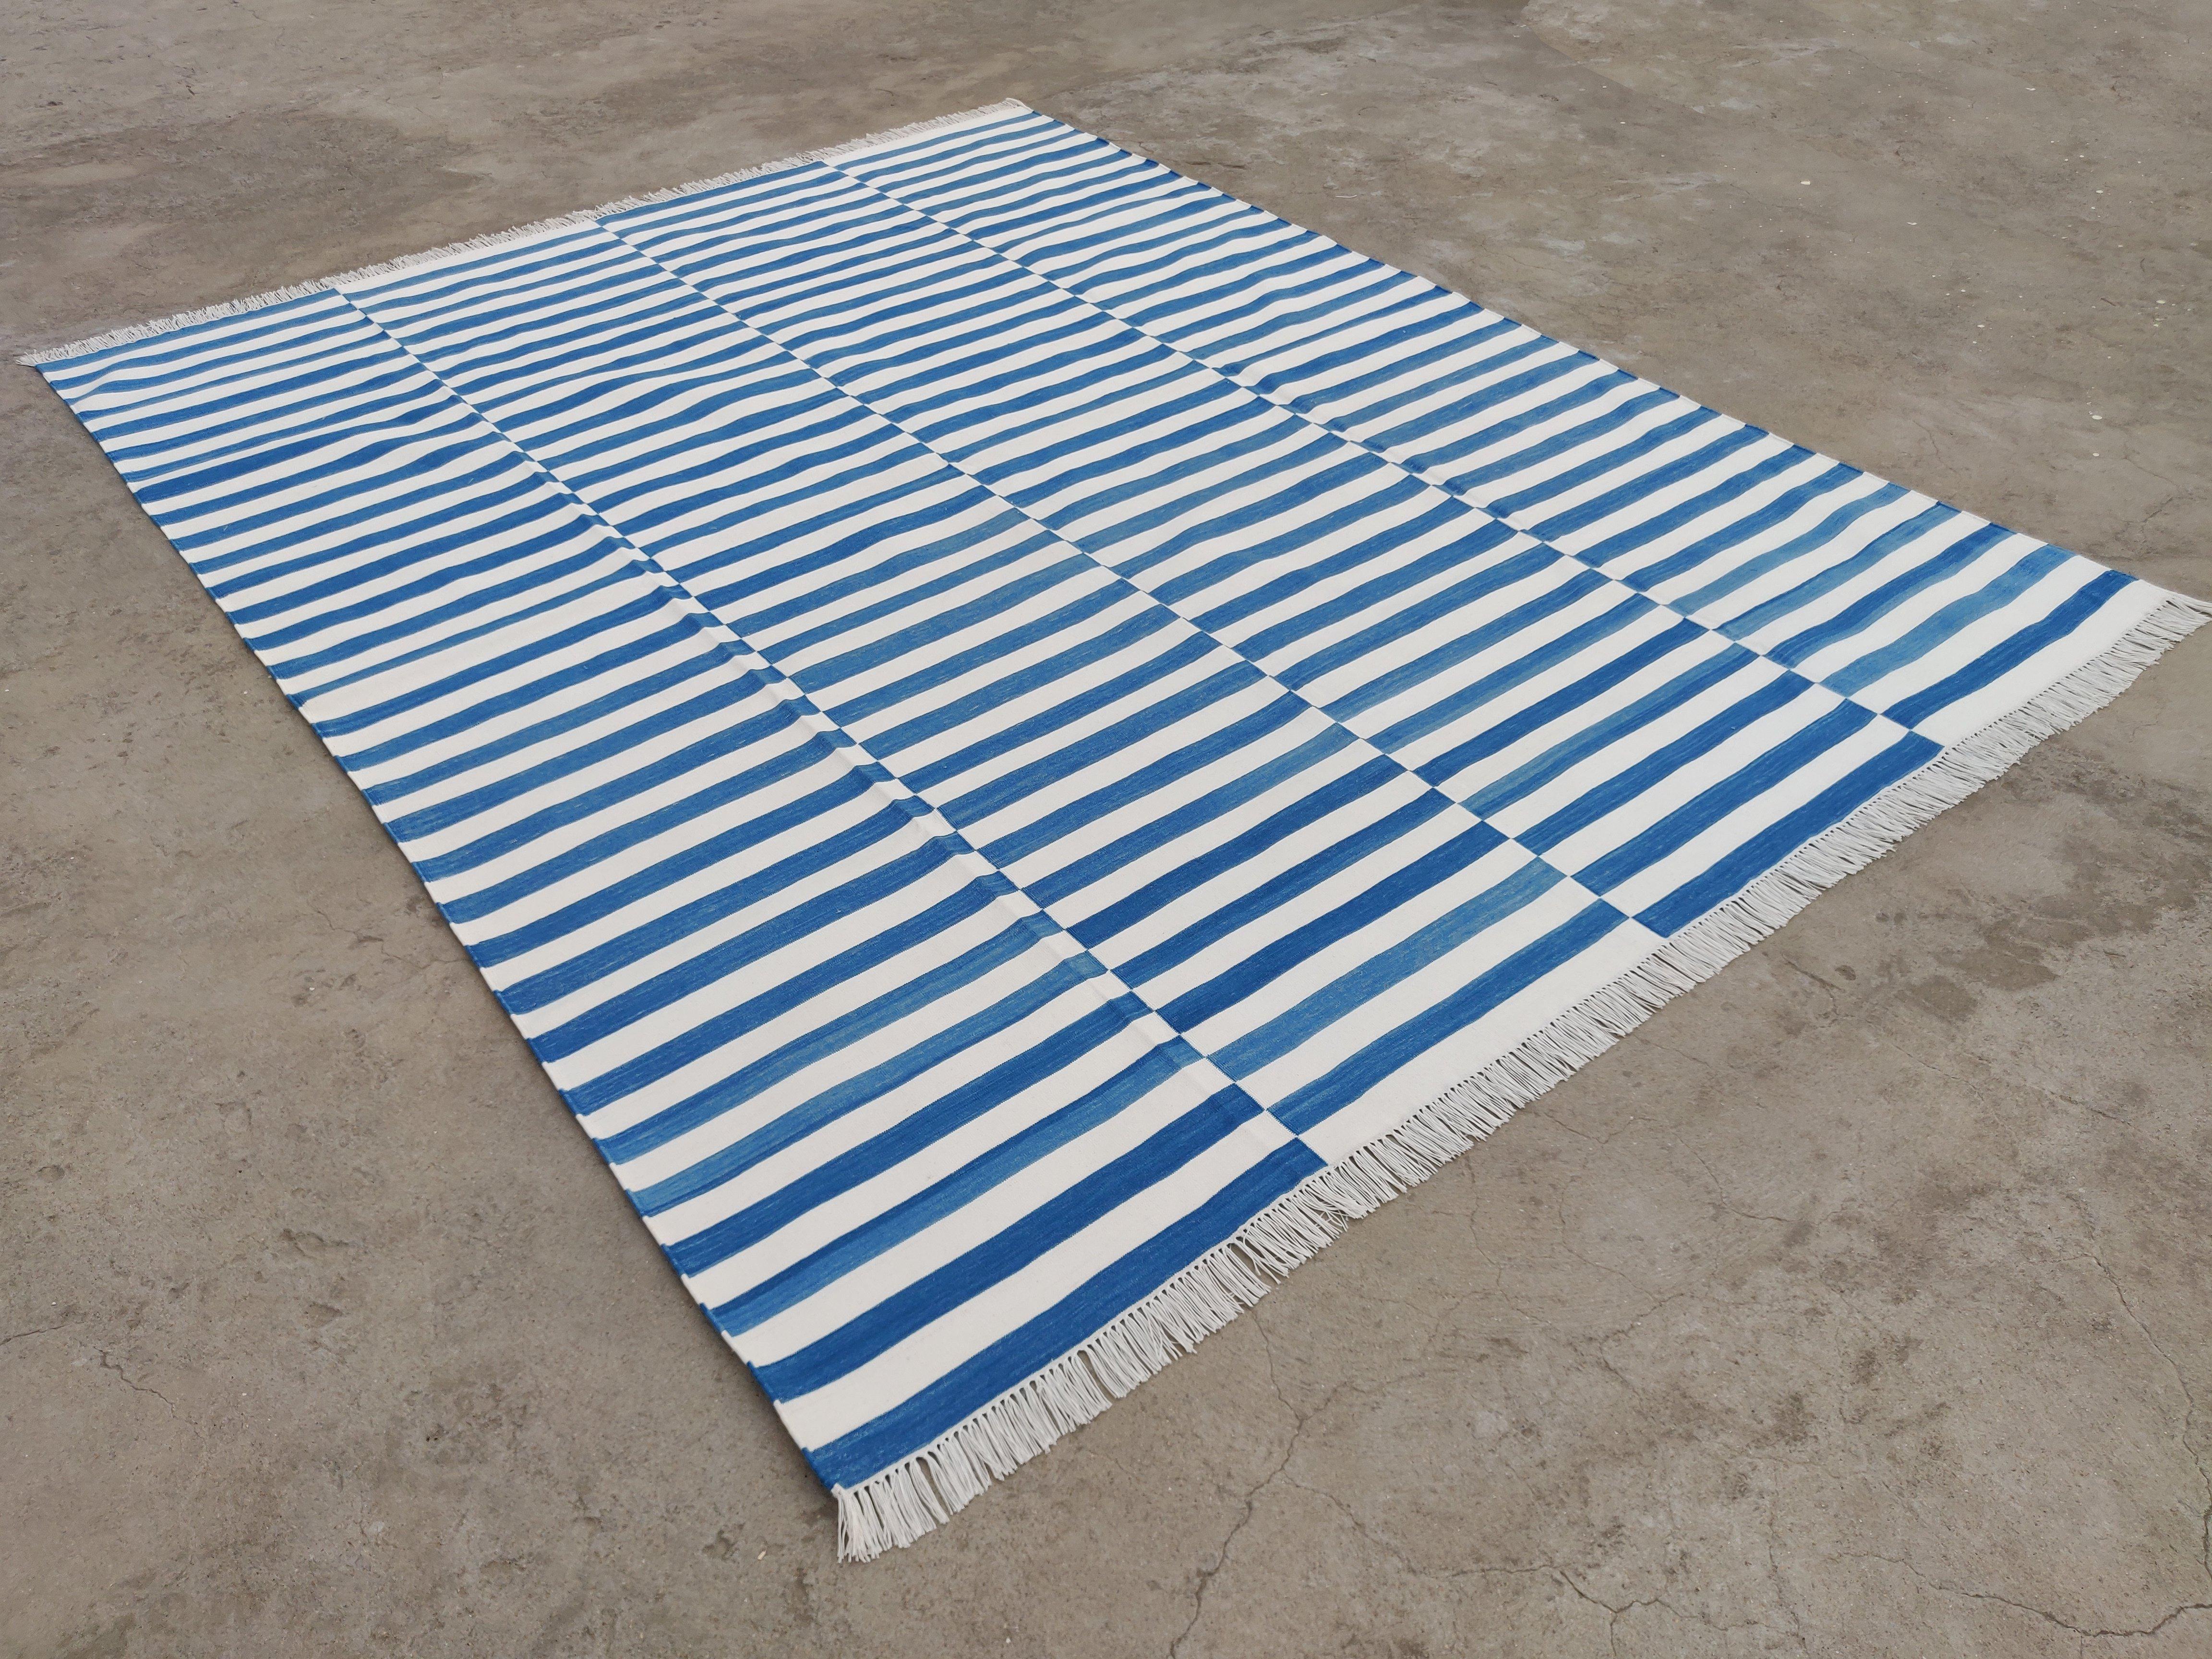 Cotton Vegetable Dyed Blue And White Striped Indian Dhurrie Rug-8'x10' (240x300cm) 

These special flat-weave dhurries are hand-woven with 15 ply 100% cotton yarn. Due to the special manufacturing techniques used to create our rugs, the size and